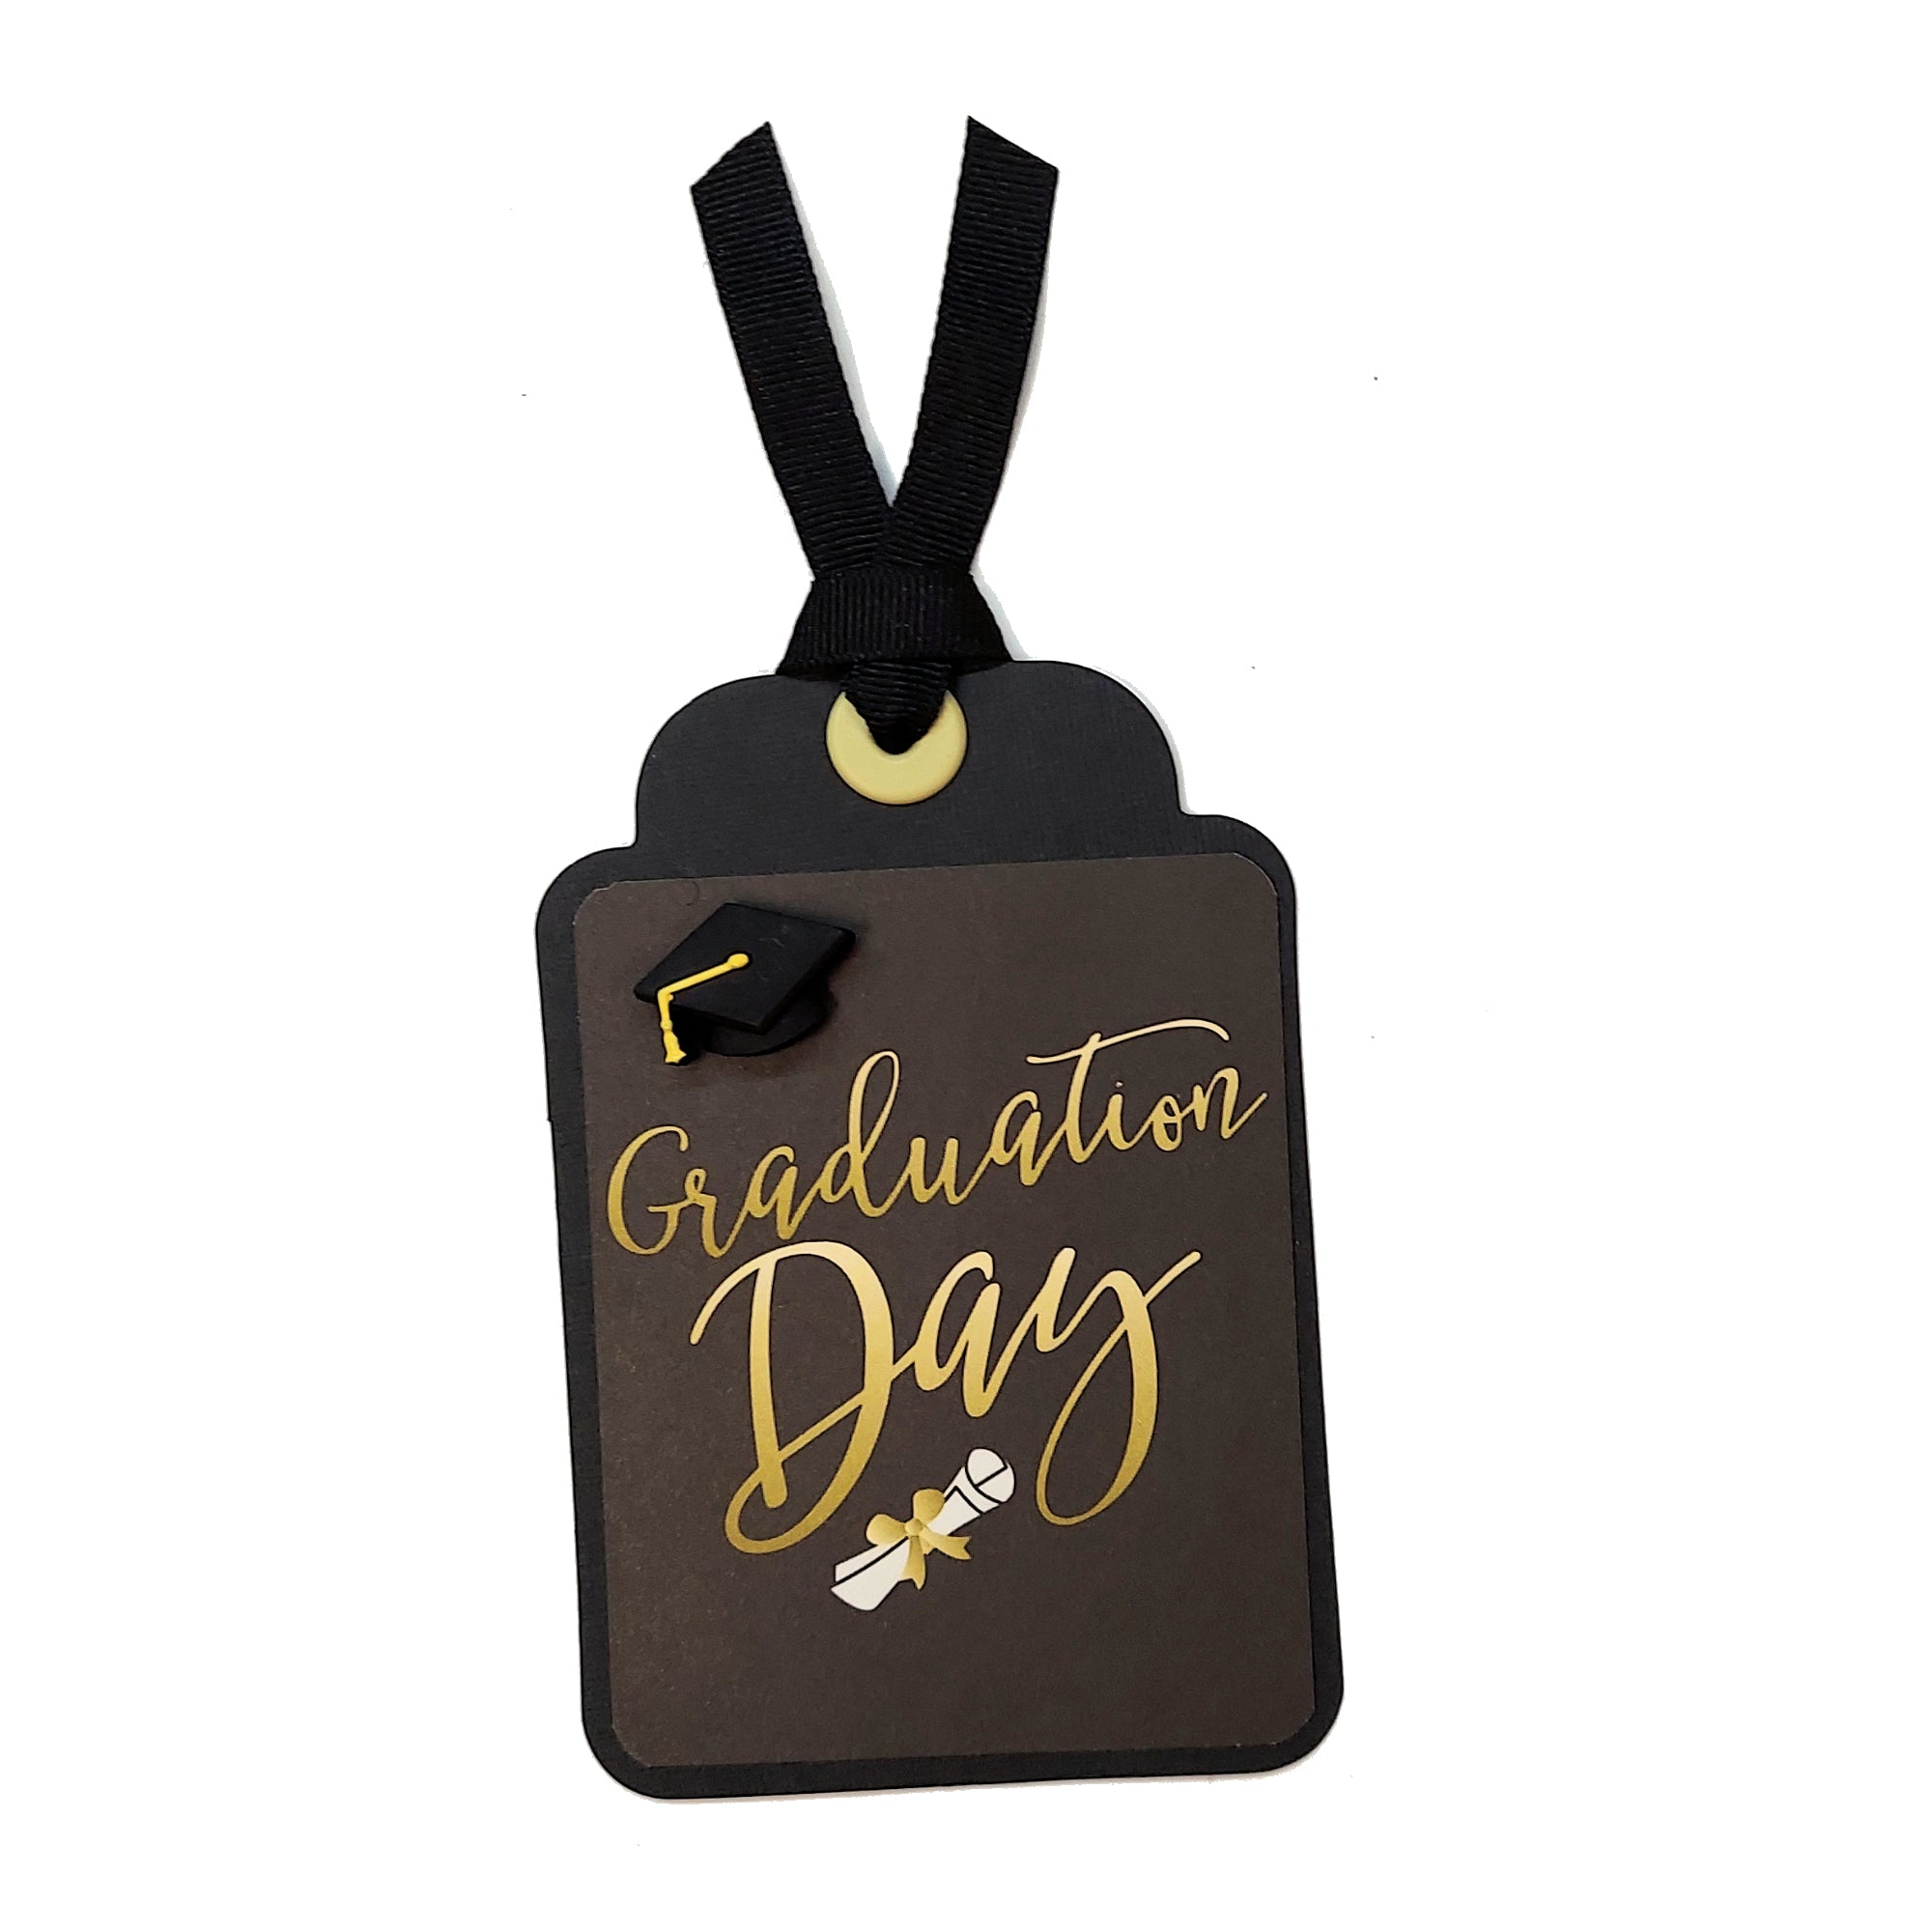 Graduation Day Tag 3 x 5 Coordinating Scrapbook Tag Embellishment by SSC Designs